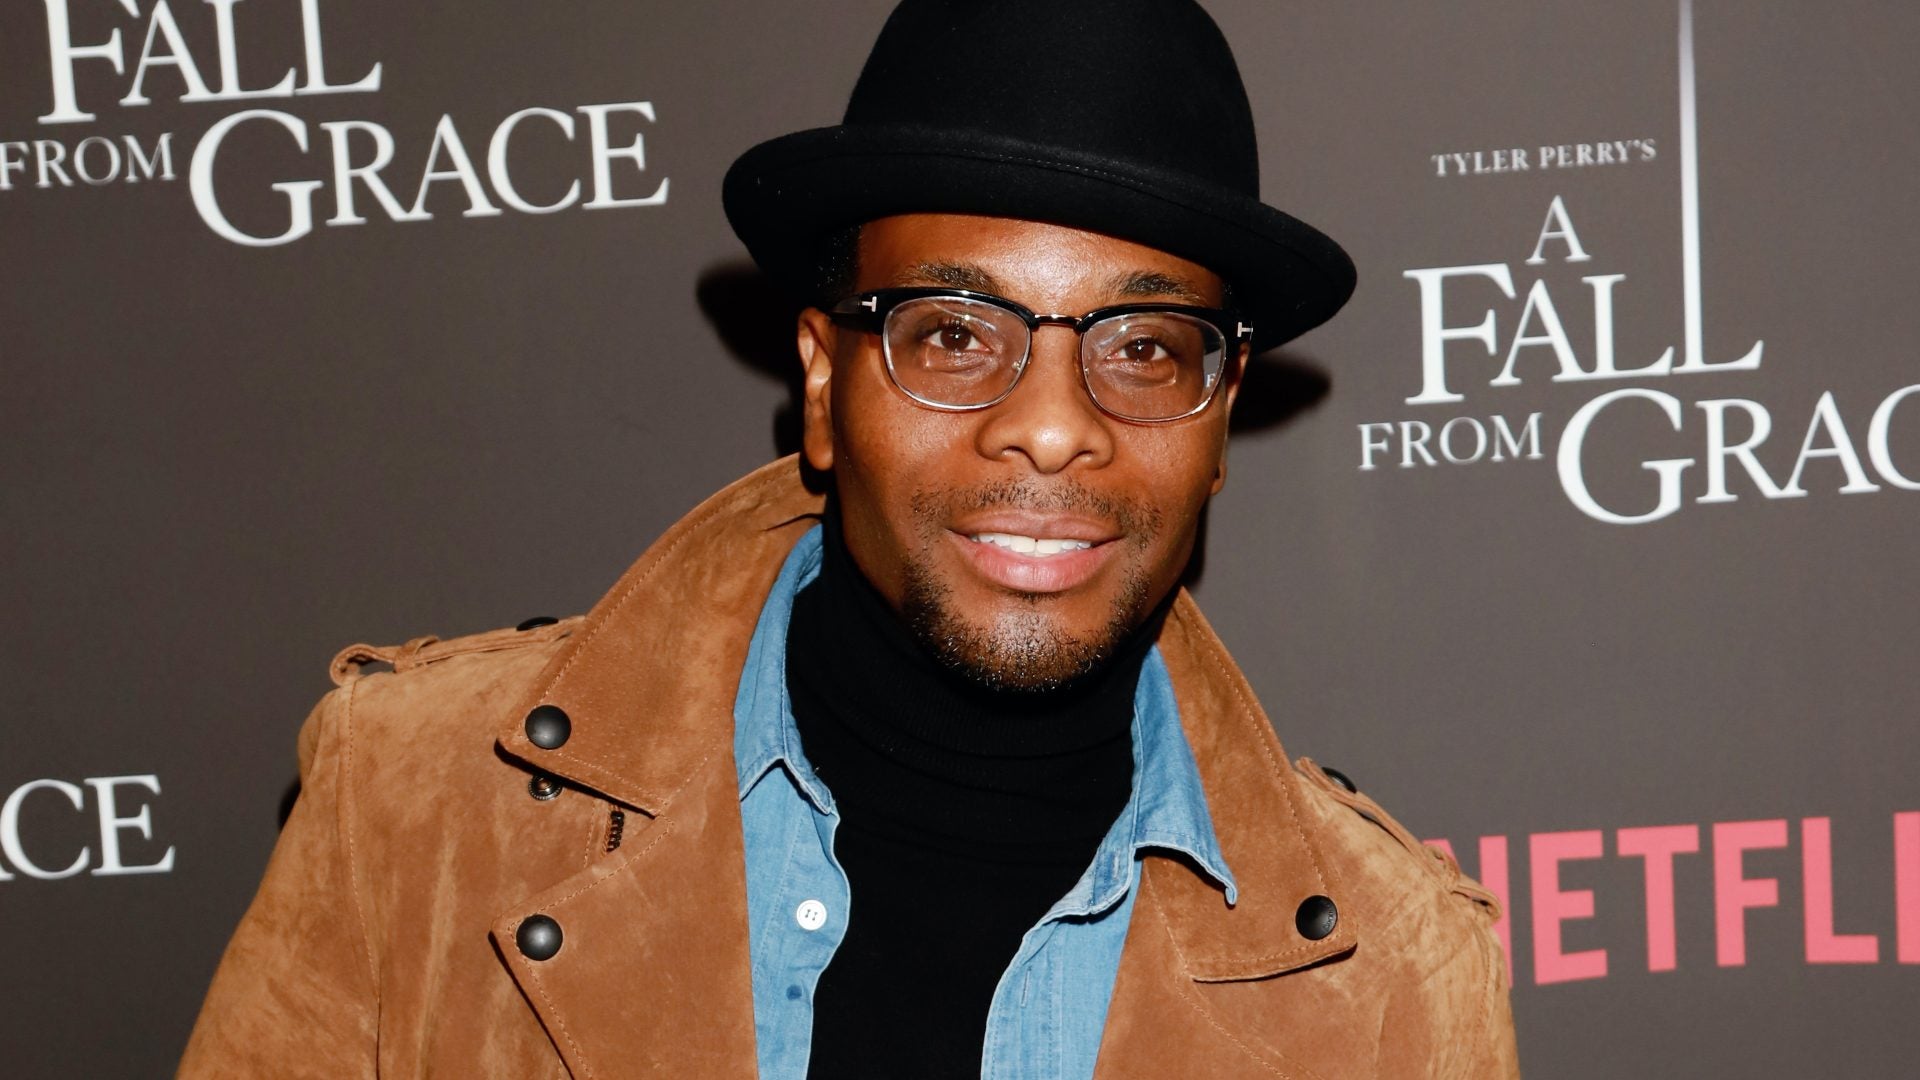 Kel Mitchell Makes Devotion His Cornerstone While Mentoring The Next Generation